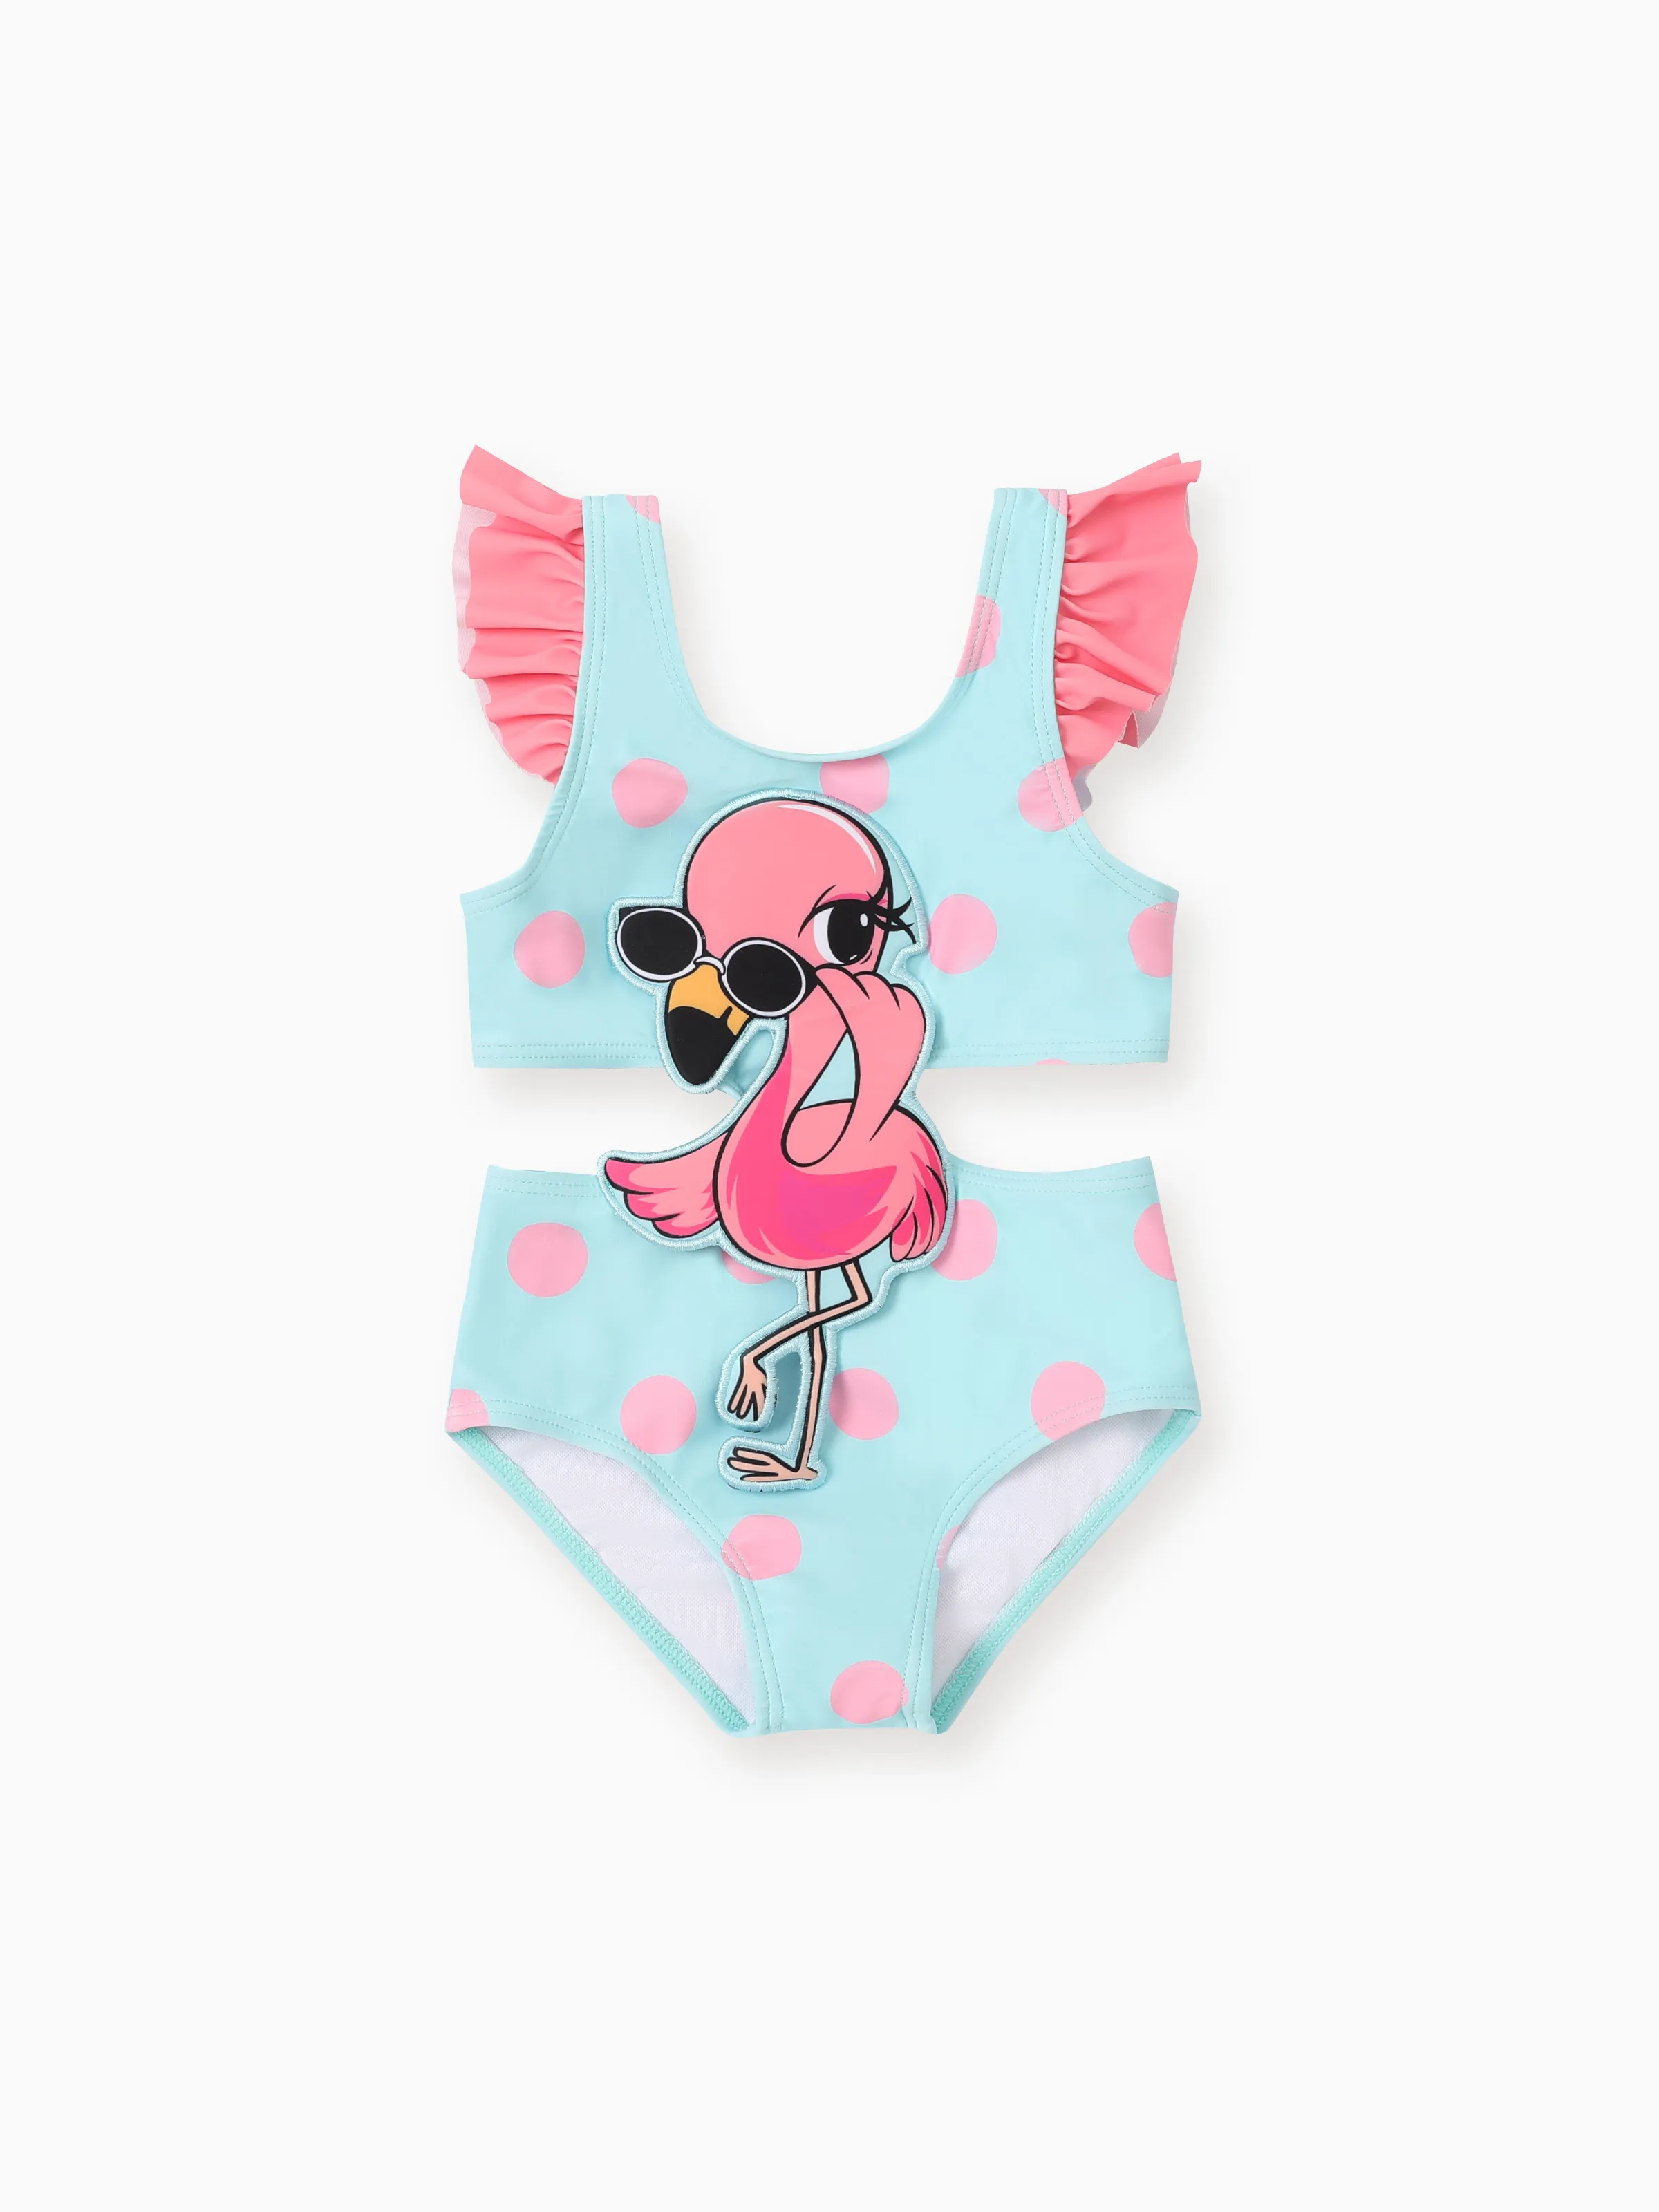 

Toddler Girl Cat/Flamingo Applique Polka Dots Print Ruffled One-Piece Swimsuit